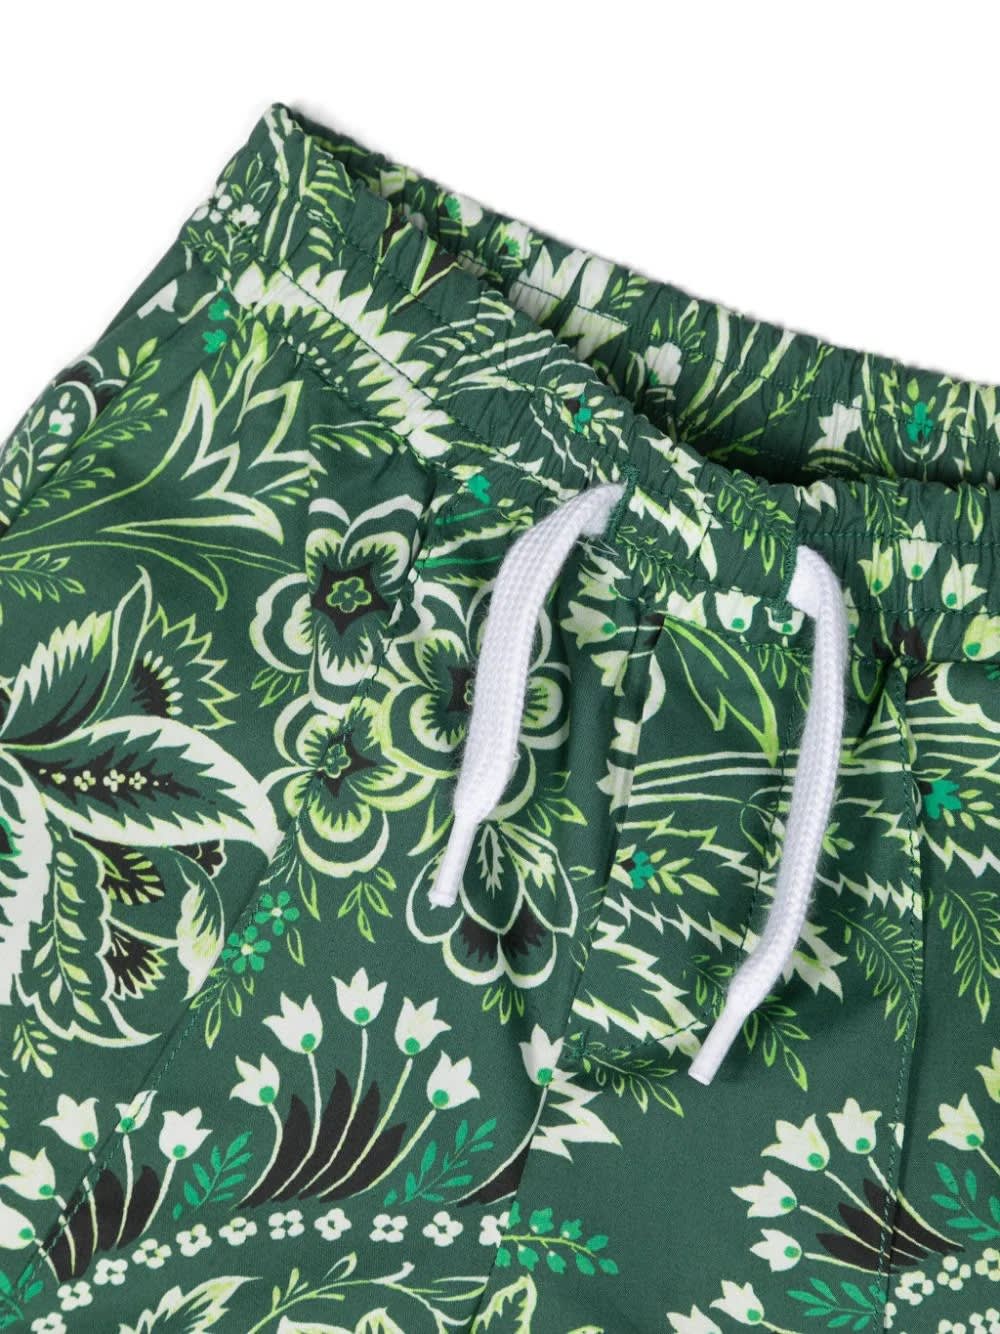 Shop Etro Shorts With Green Paisley Print